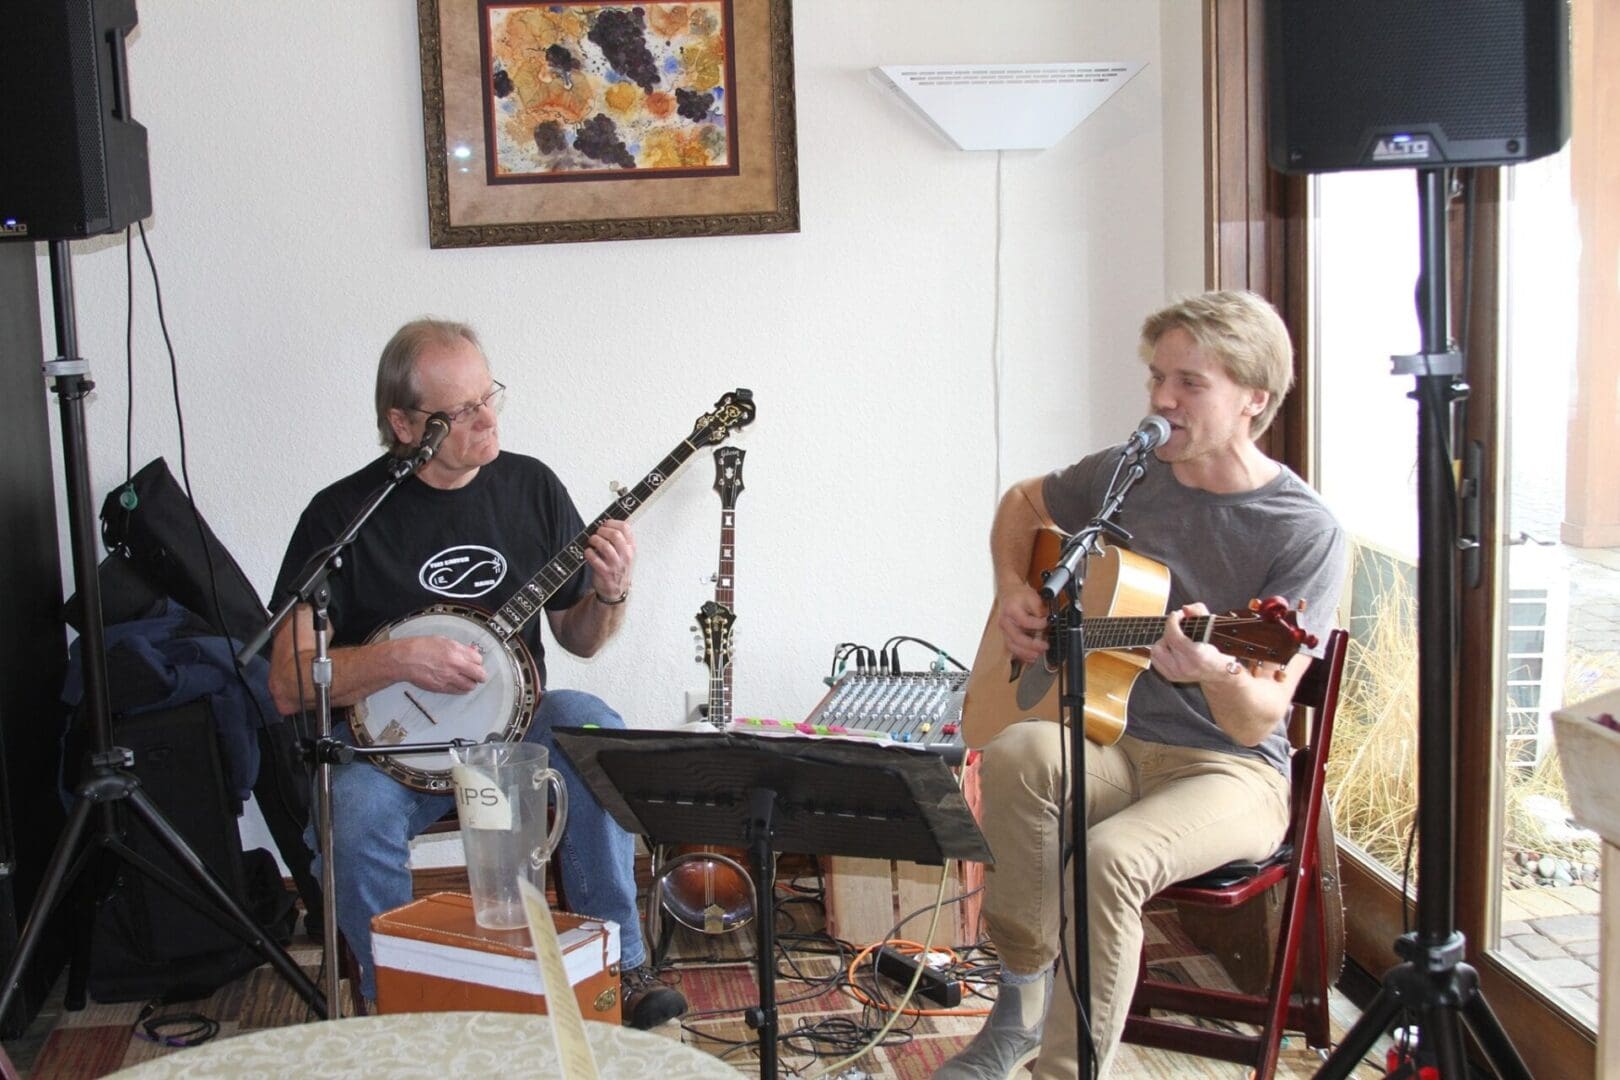 Two men playing guitars in a room.